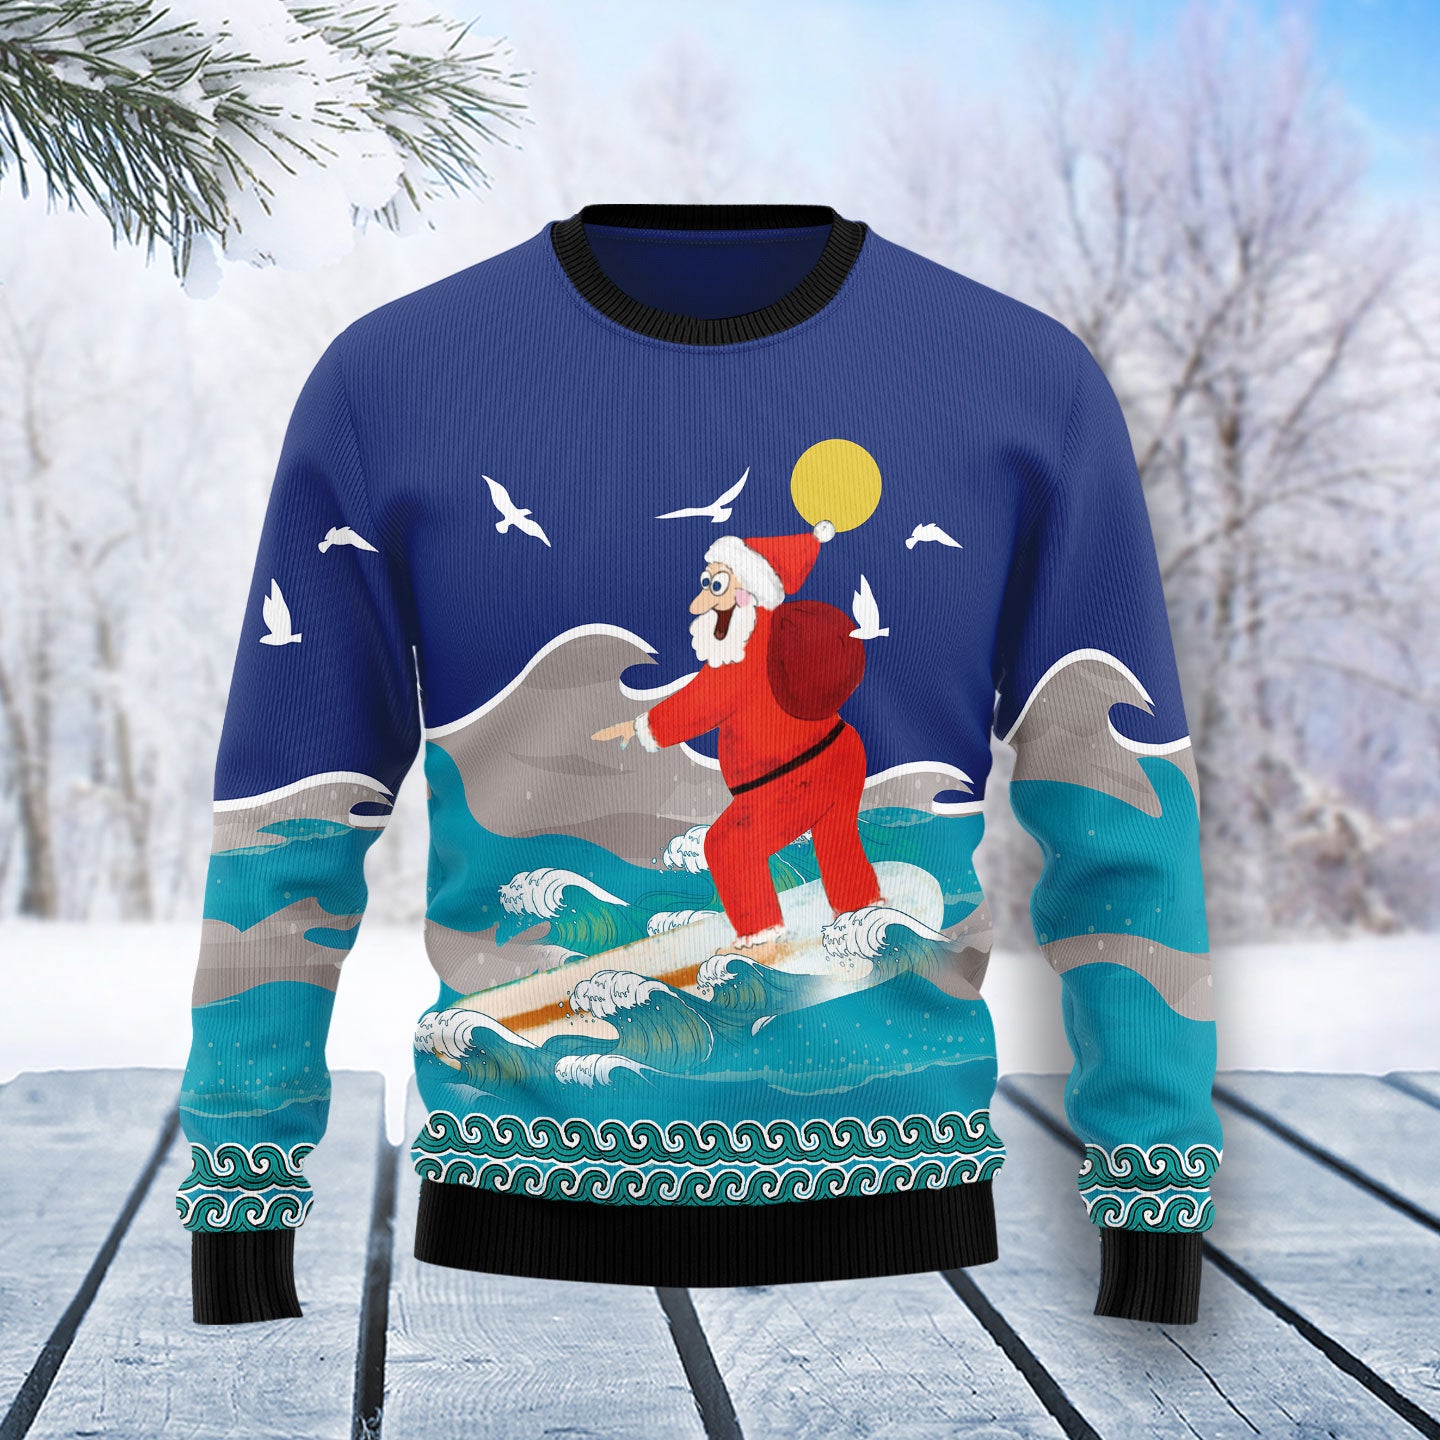 Surfing Santa T2511 unisex womens & mens, couples matching, friends, funny family ugly christmas holiday sweater gifts (plus size available)